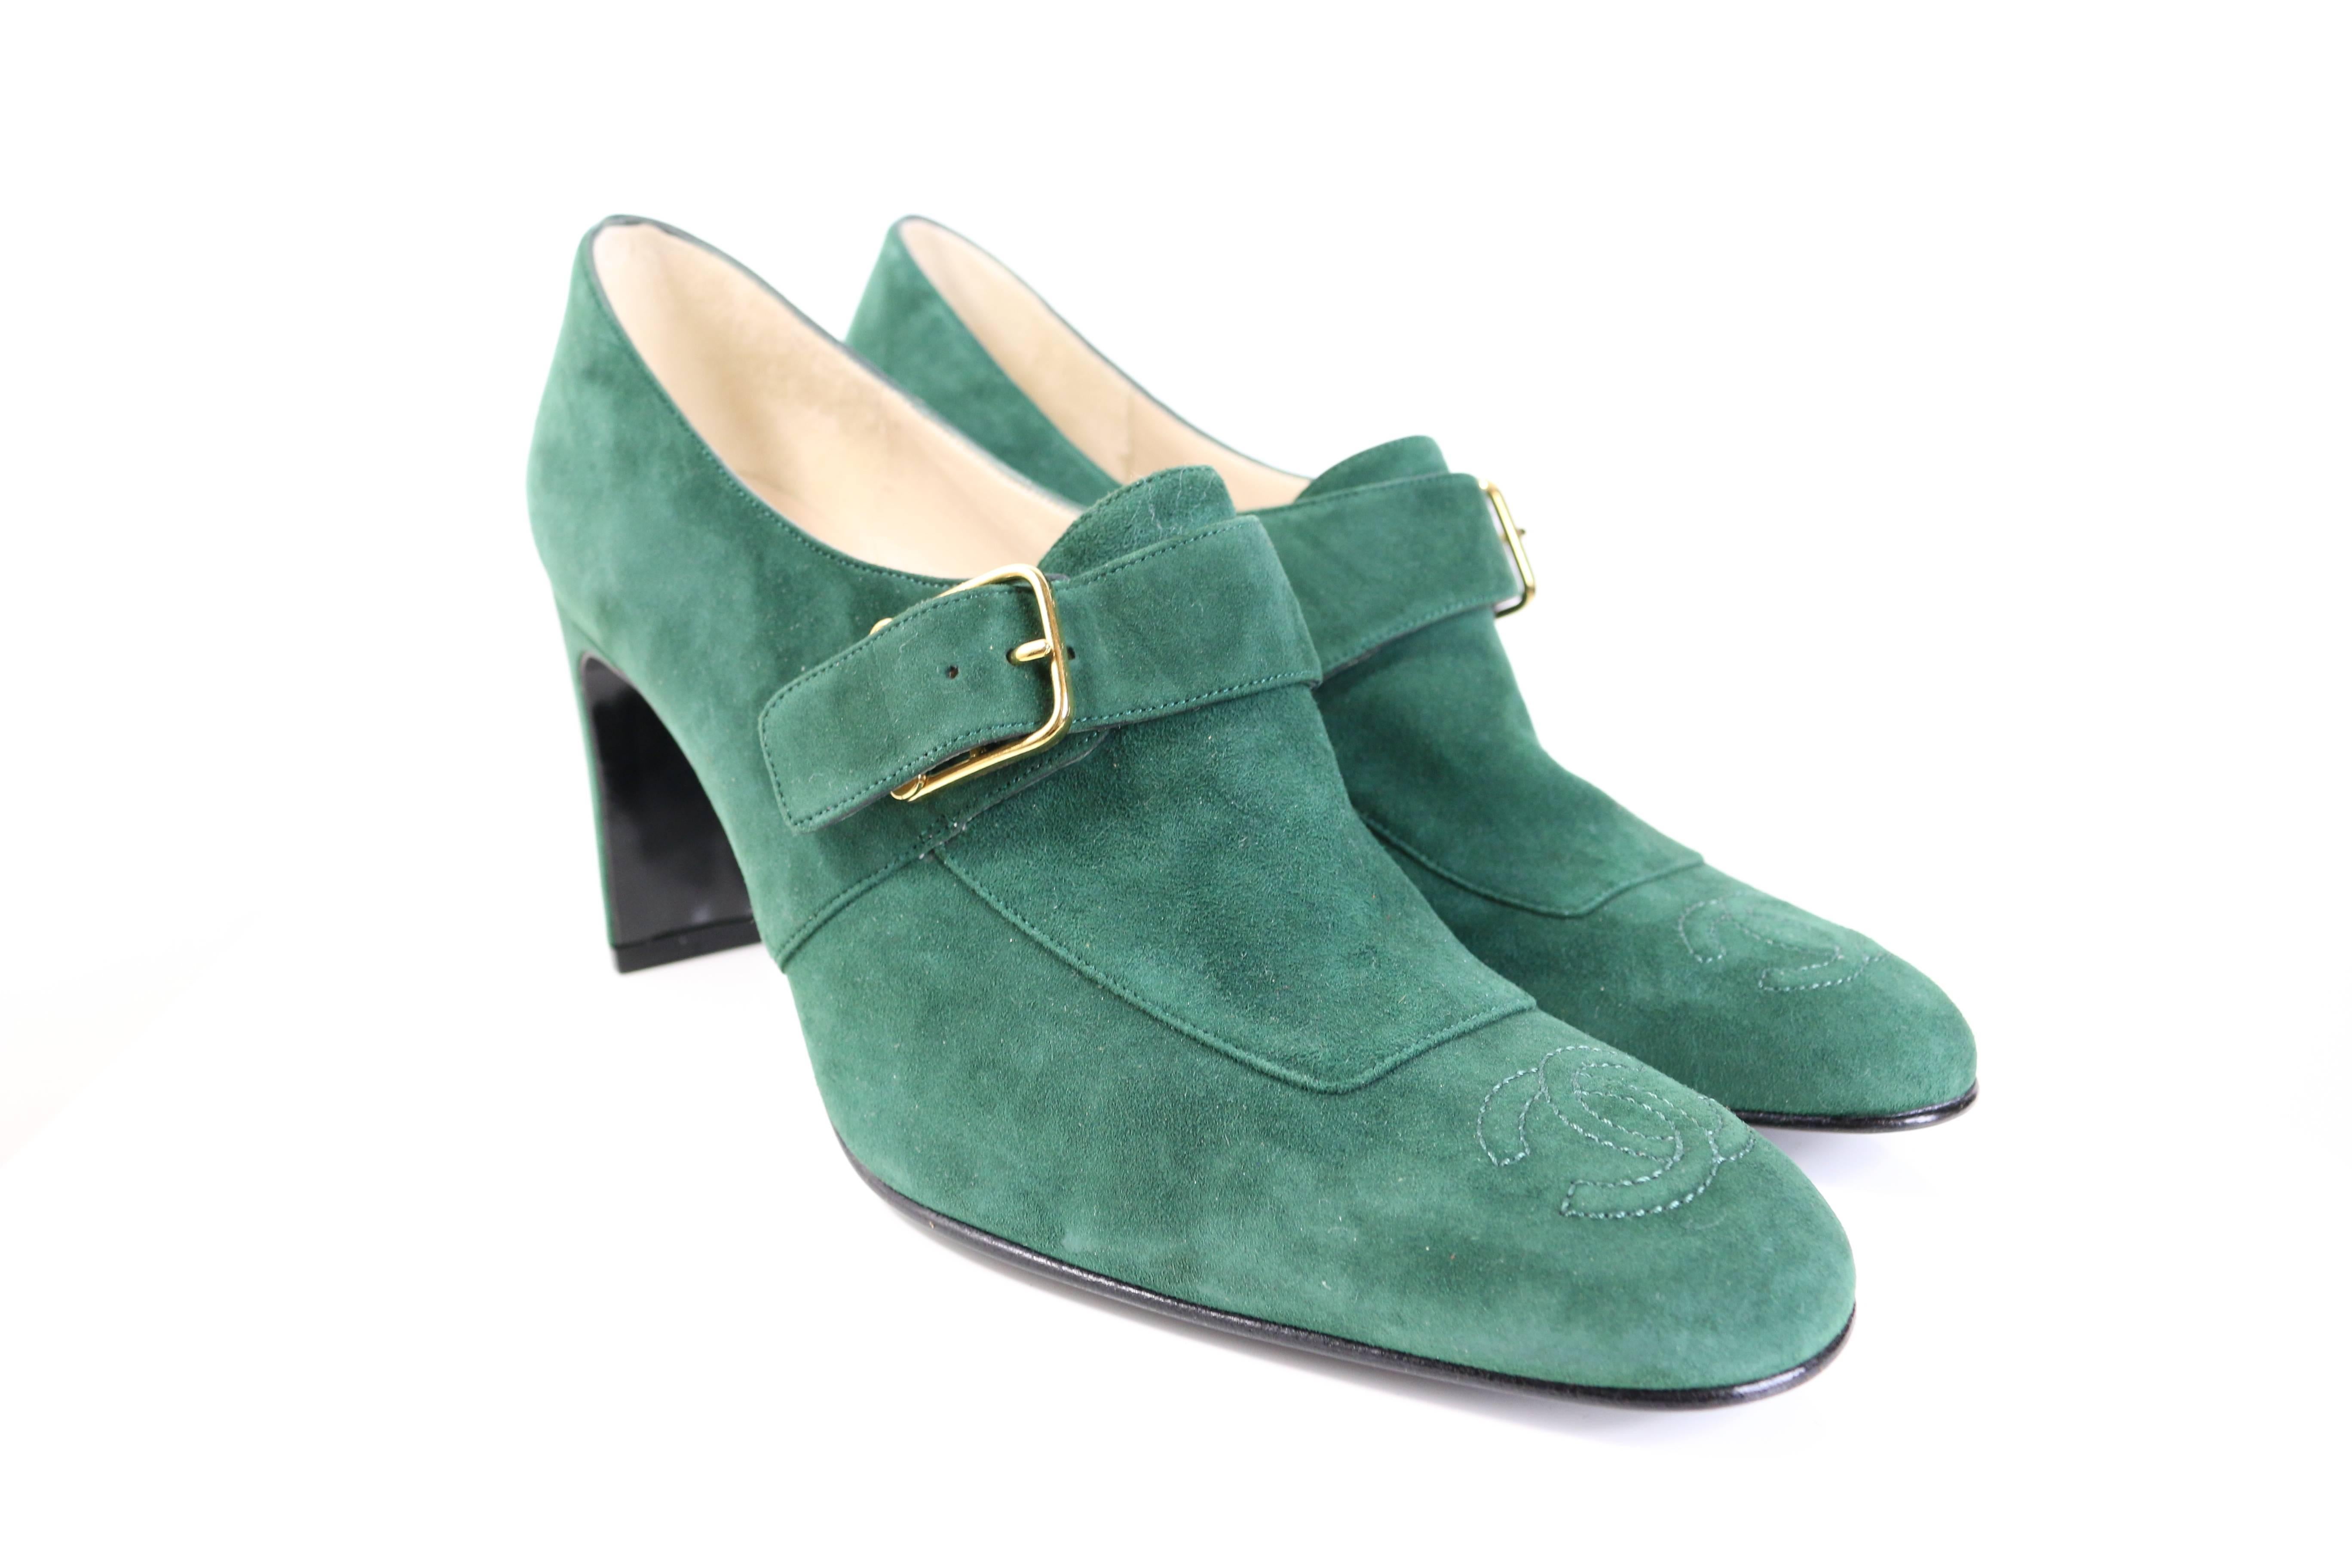 Chanel Green Suede Square Toe Ankle Strap Heels  In Excellent Condition For Sale In Sheung Wan, HK